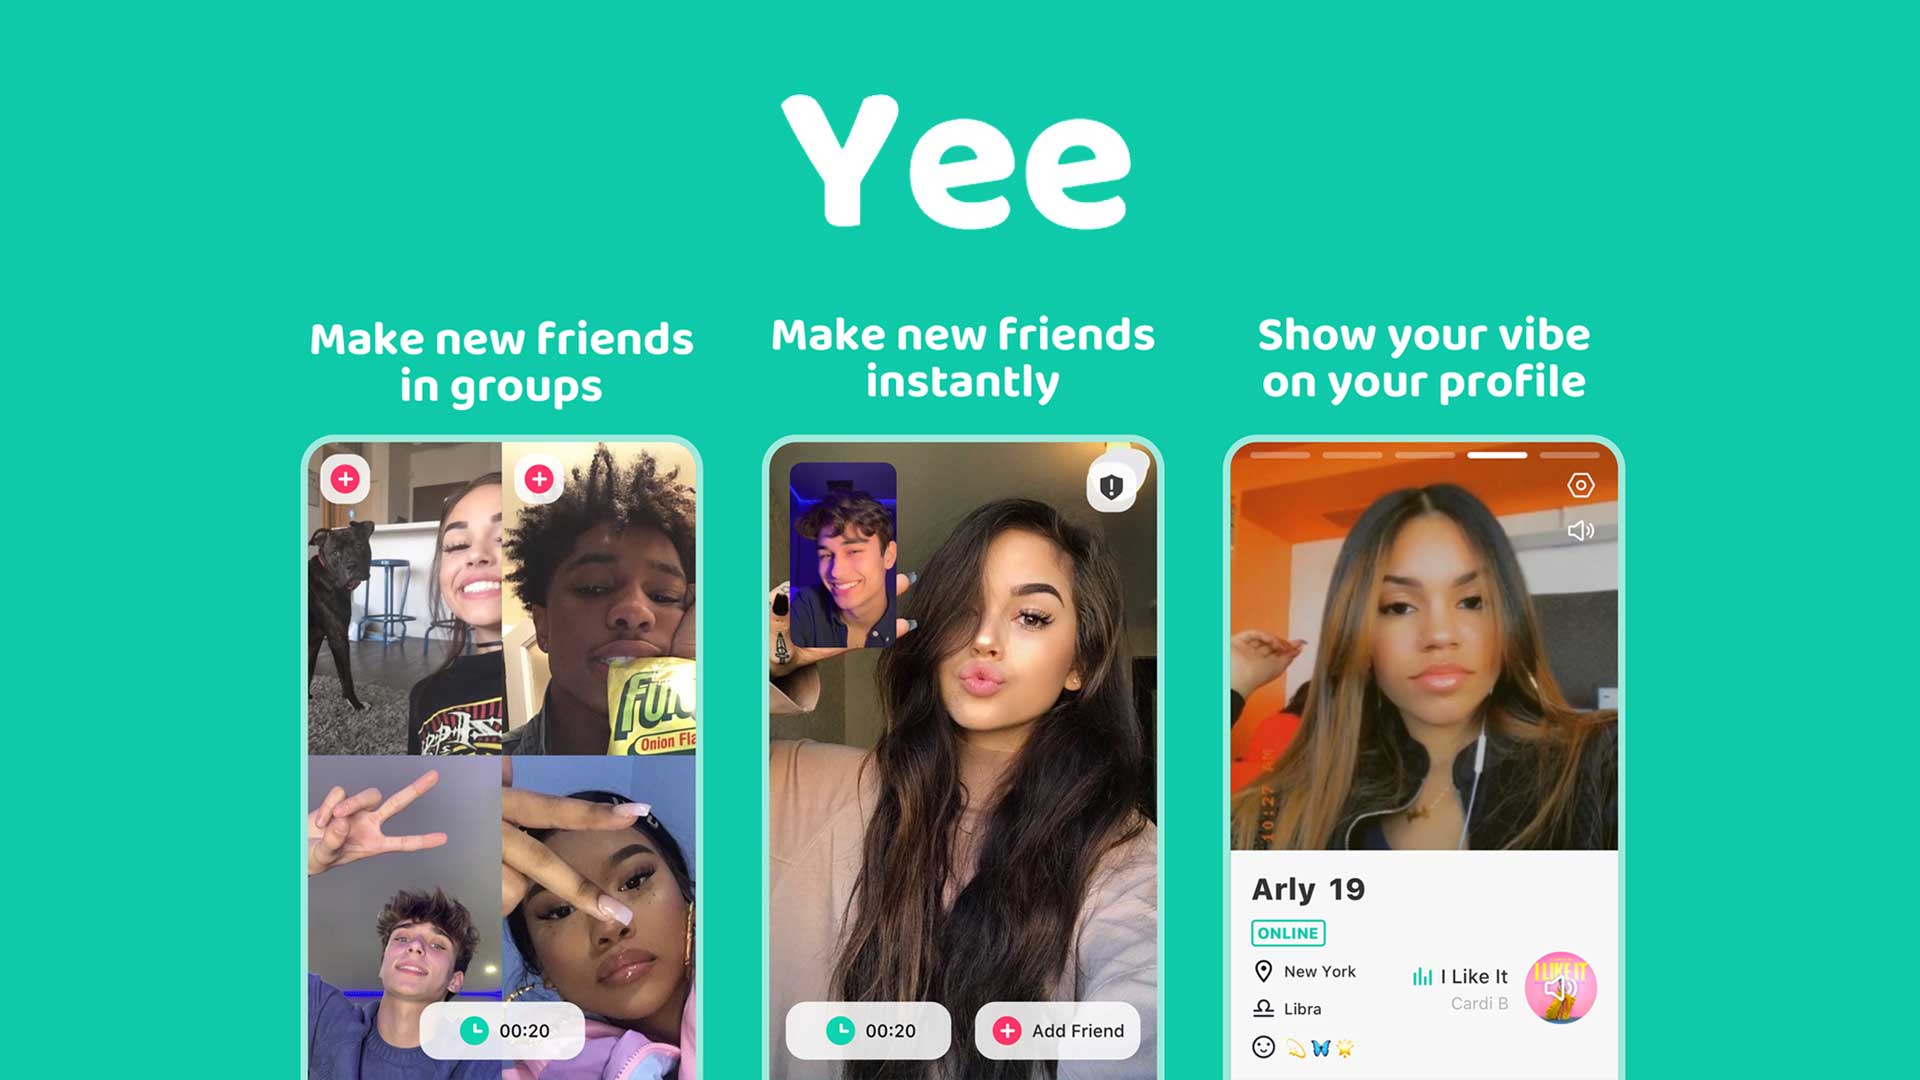 How to get the Yee App on iPhone